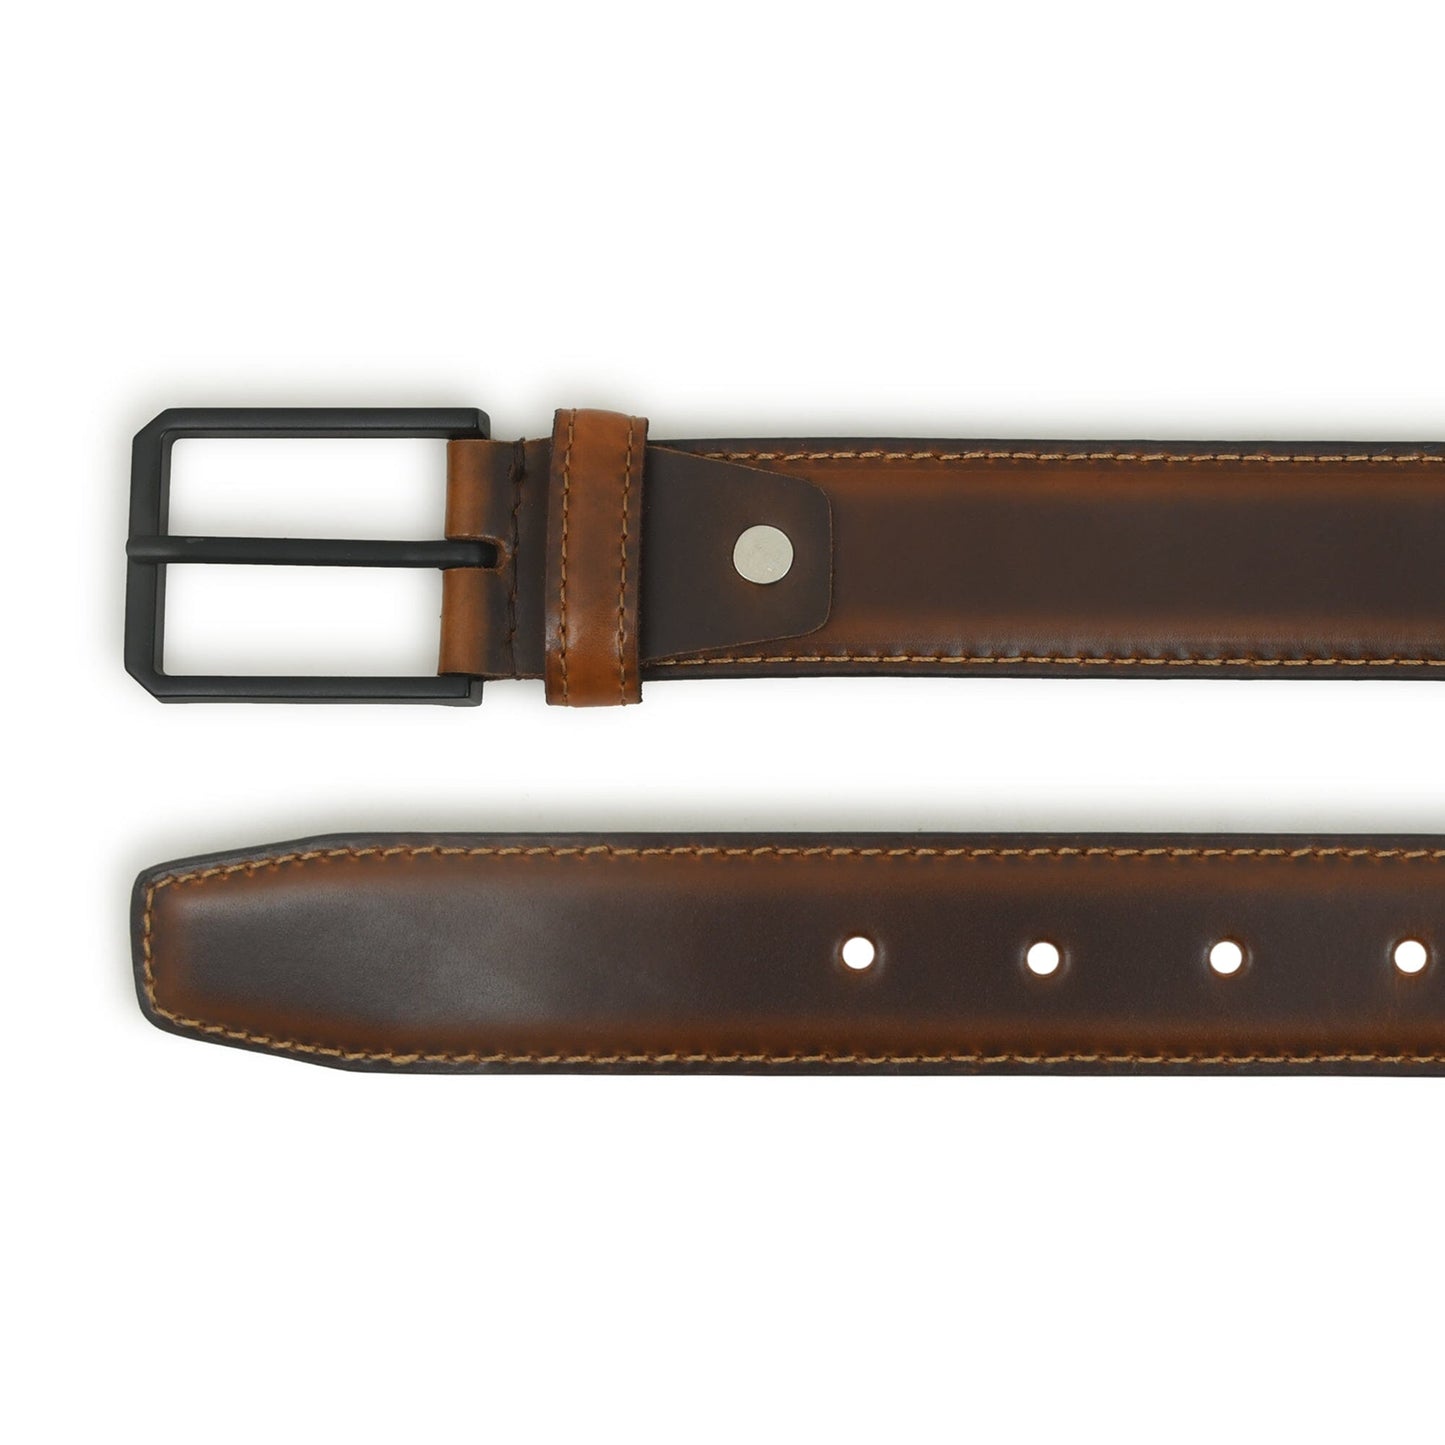 Cooper Caramel Leather Belt - The Tool Store